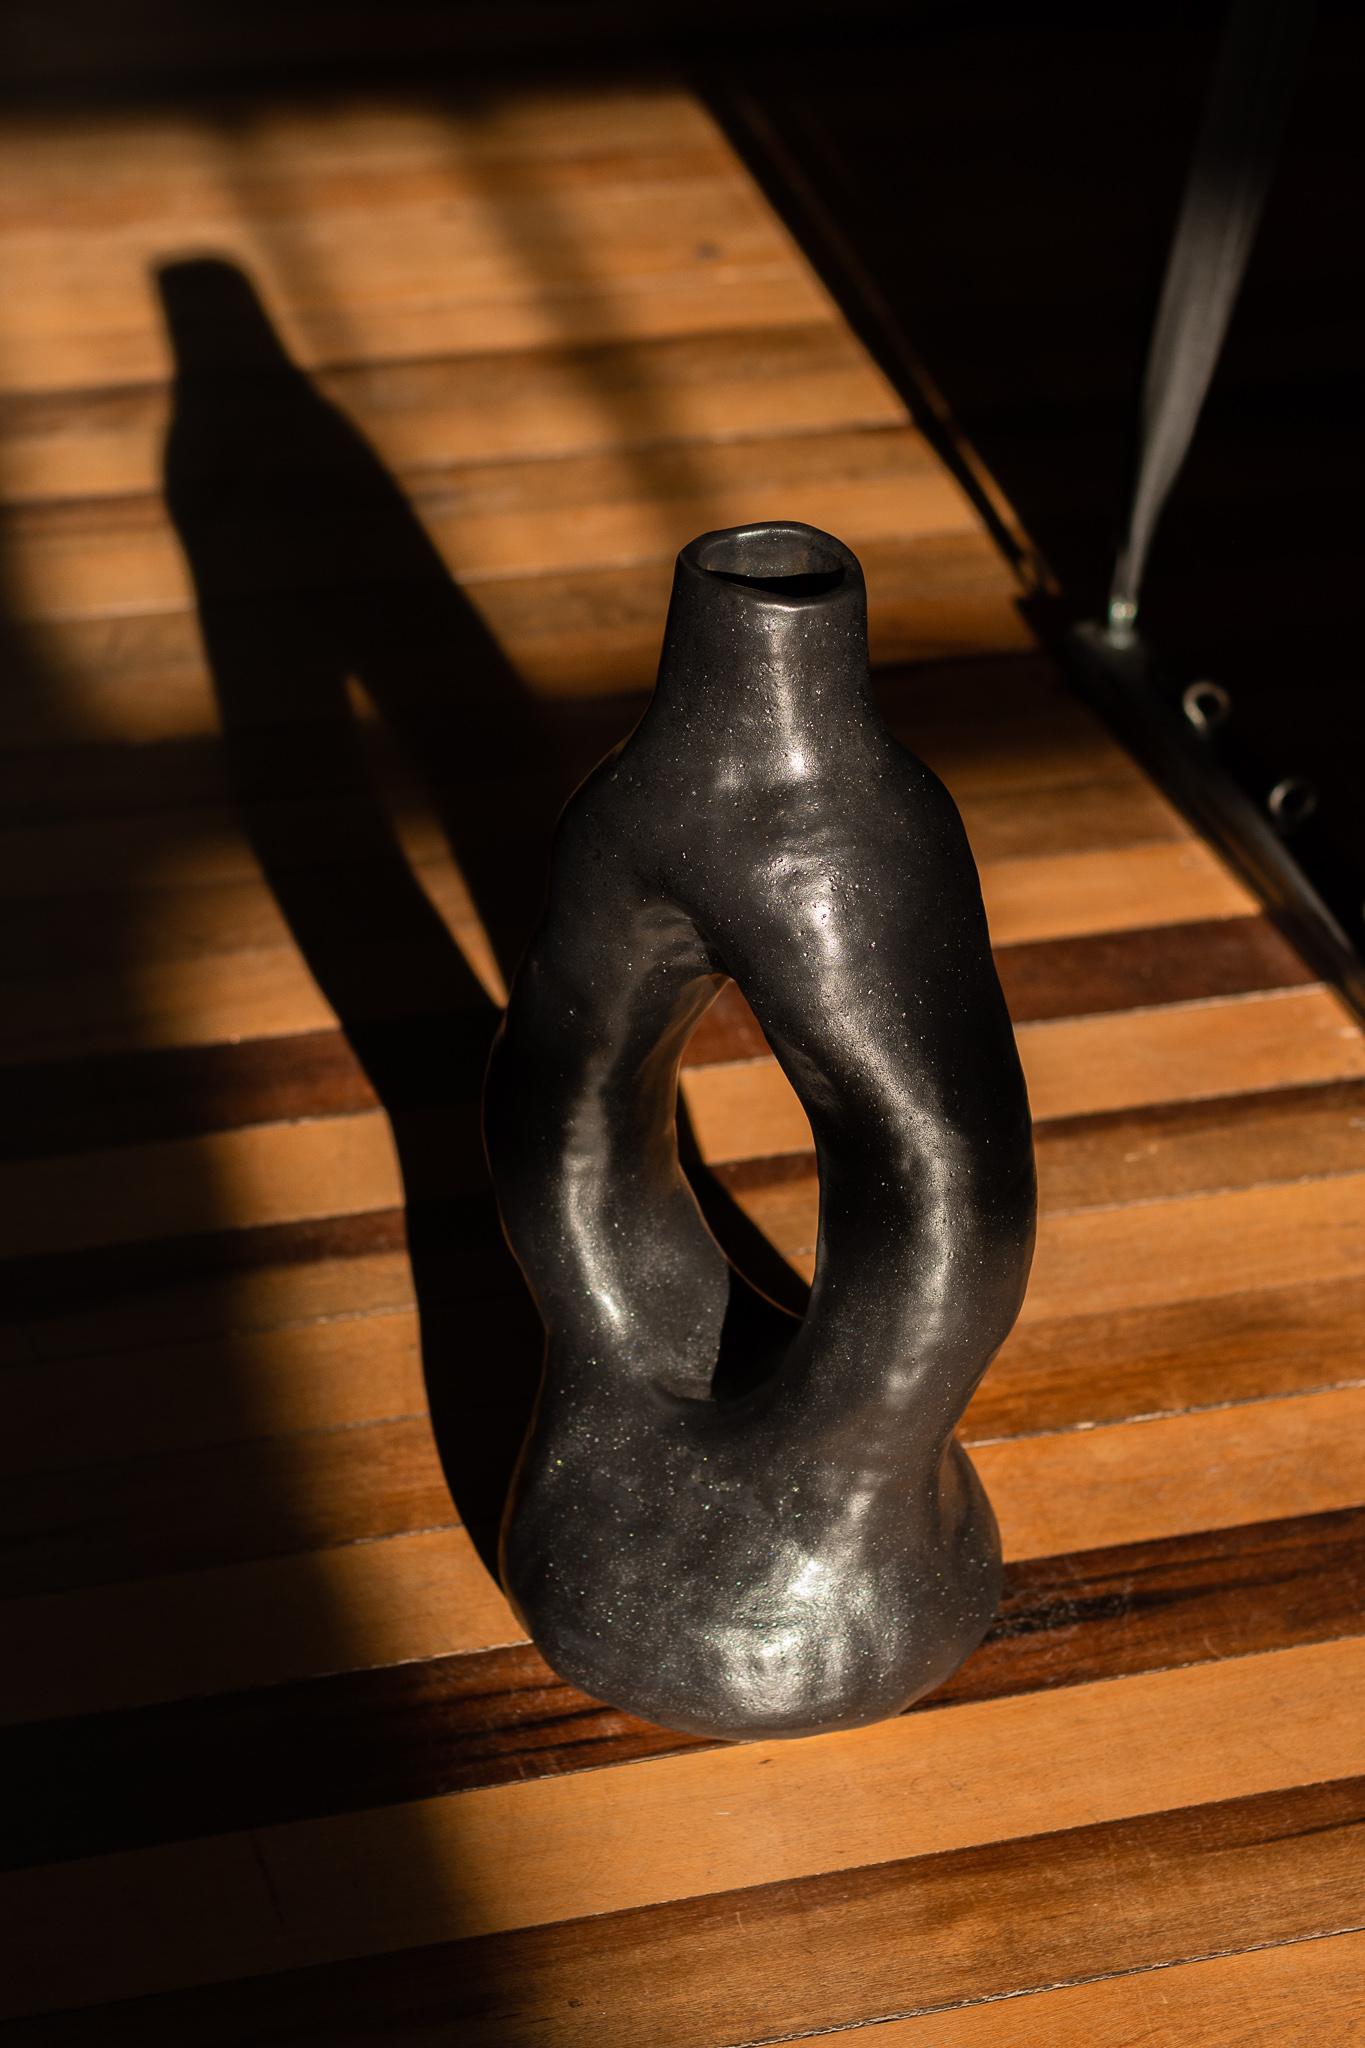 The vase from the Alba series, especially the N.2 vase, is a unique piece that embraces the artisanal process. Manufactured without the use of molds, each vase absorbs the distinct contours and textures of the artist's hand, resulting in a clean and